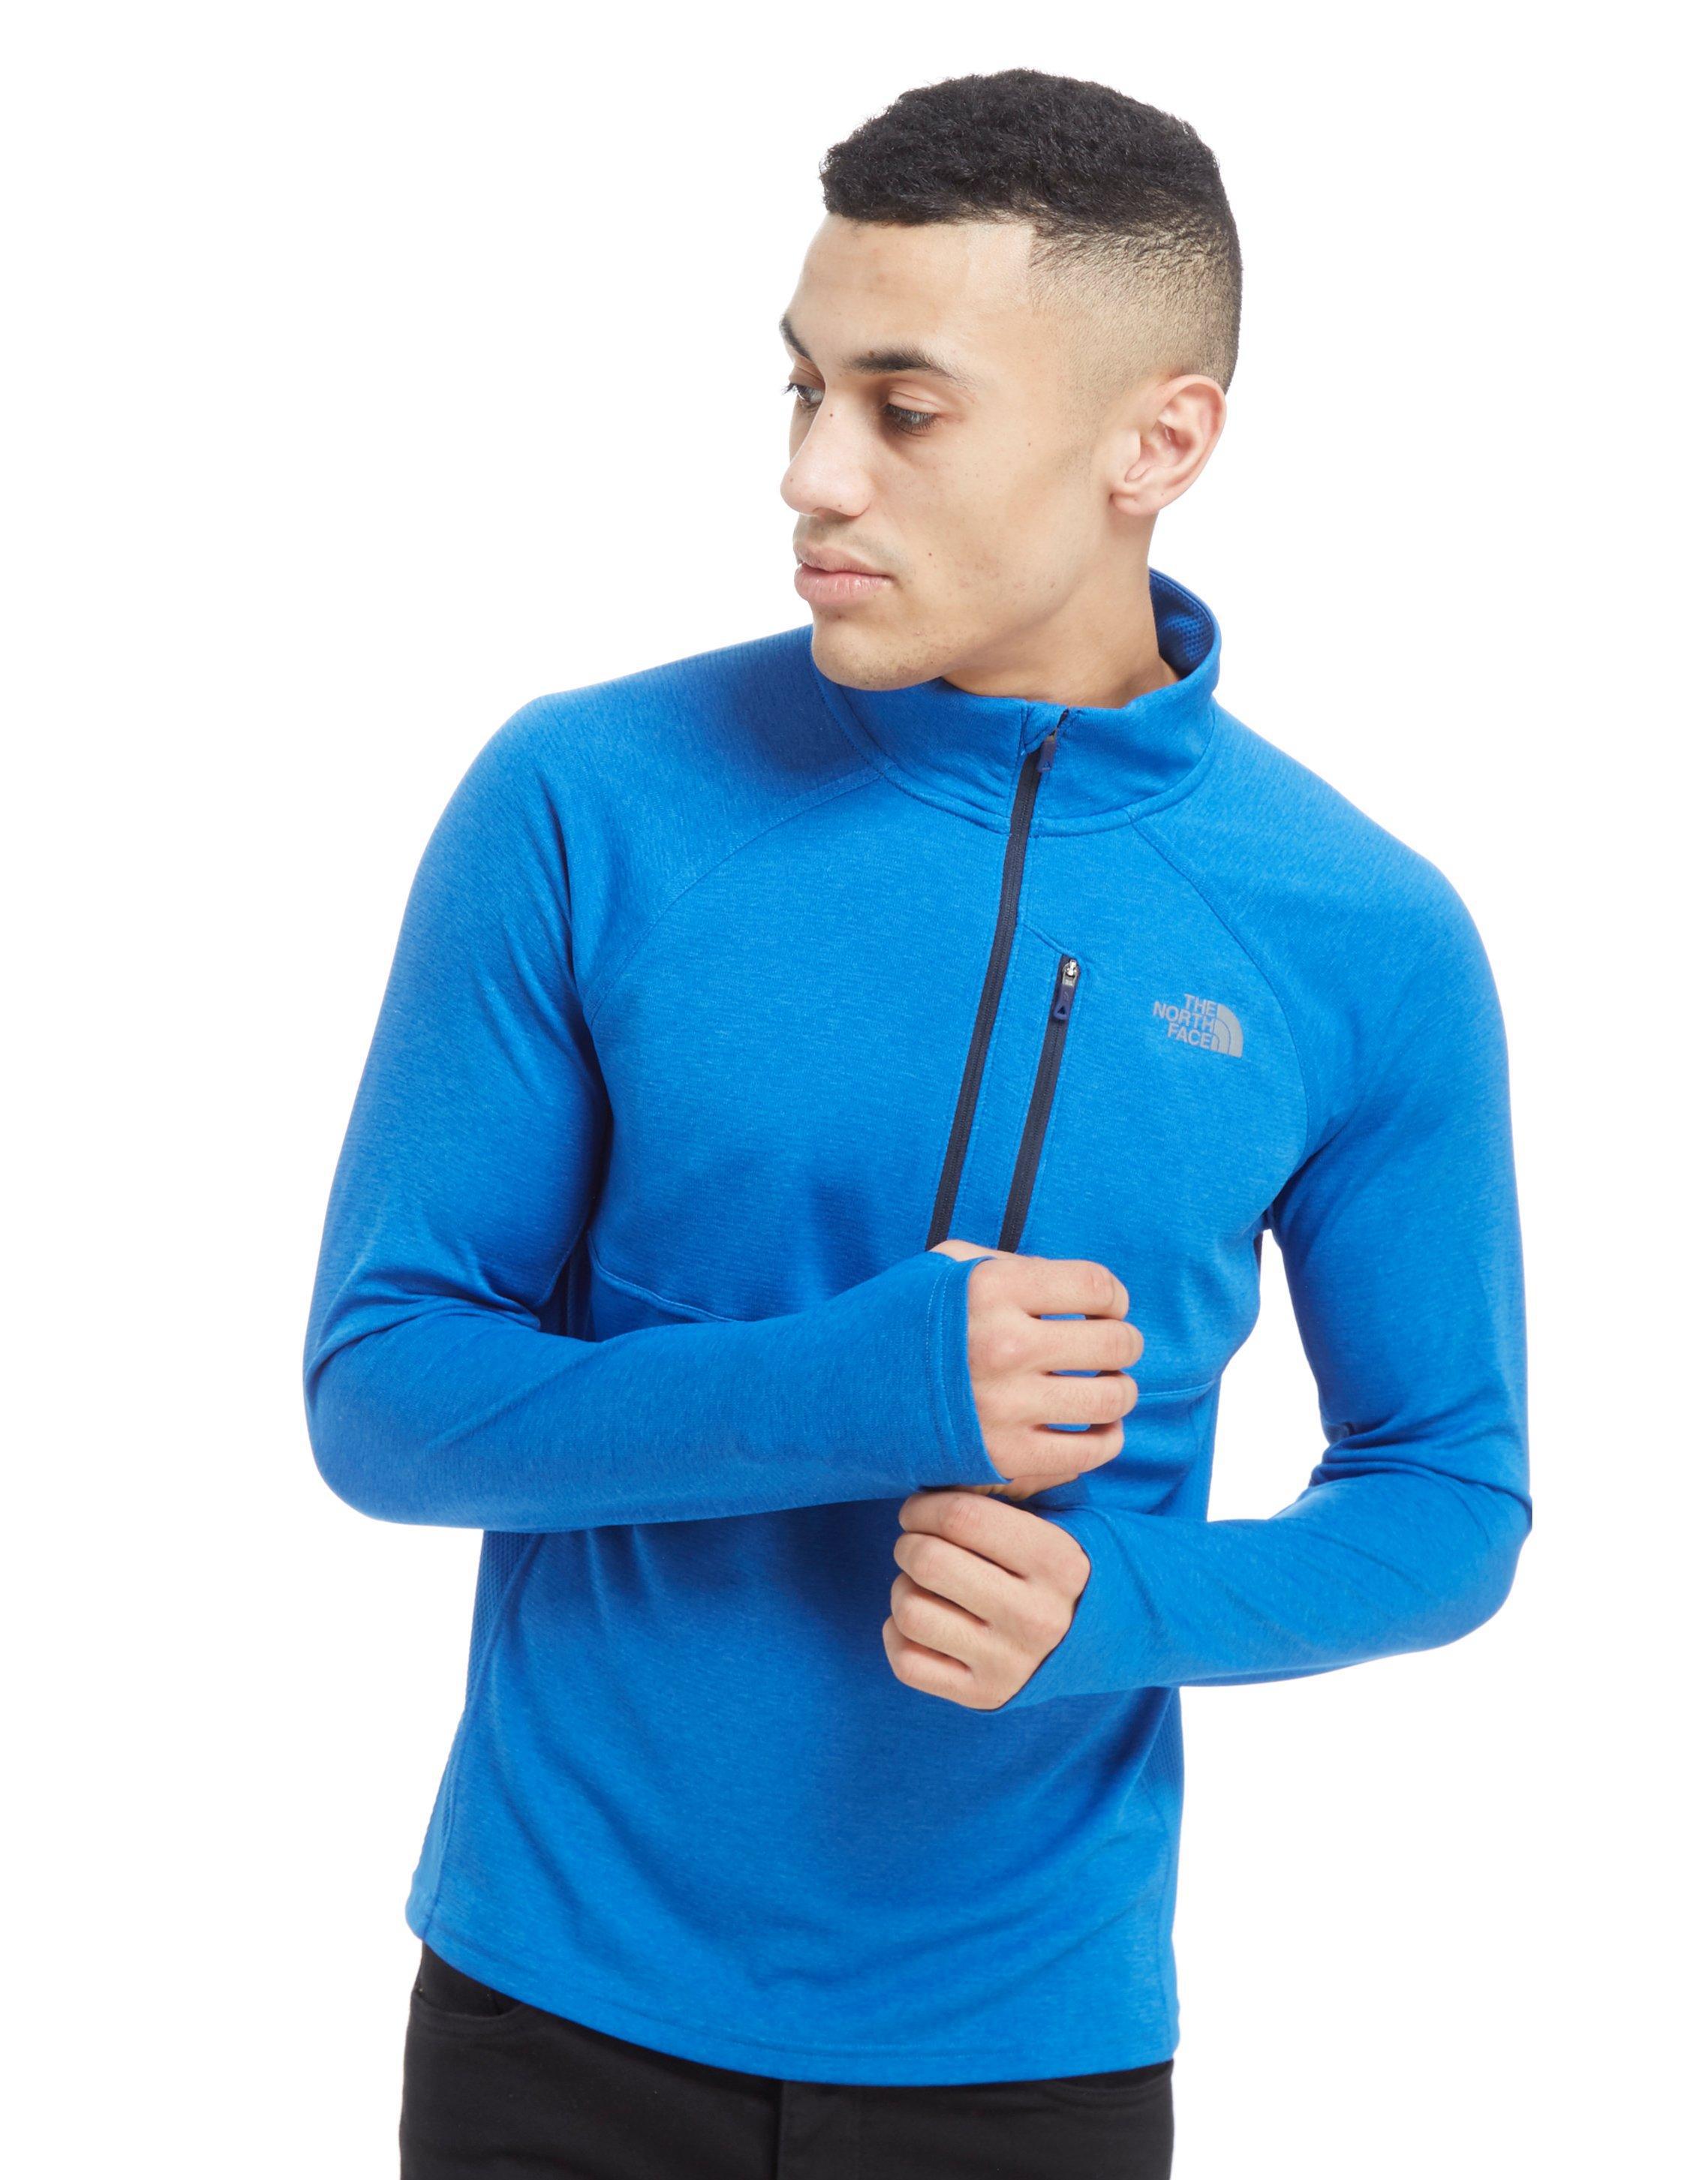 The North Face Ambition Top Sellers, 50% OFF | www.ingeniovirtual.com